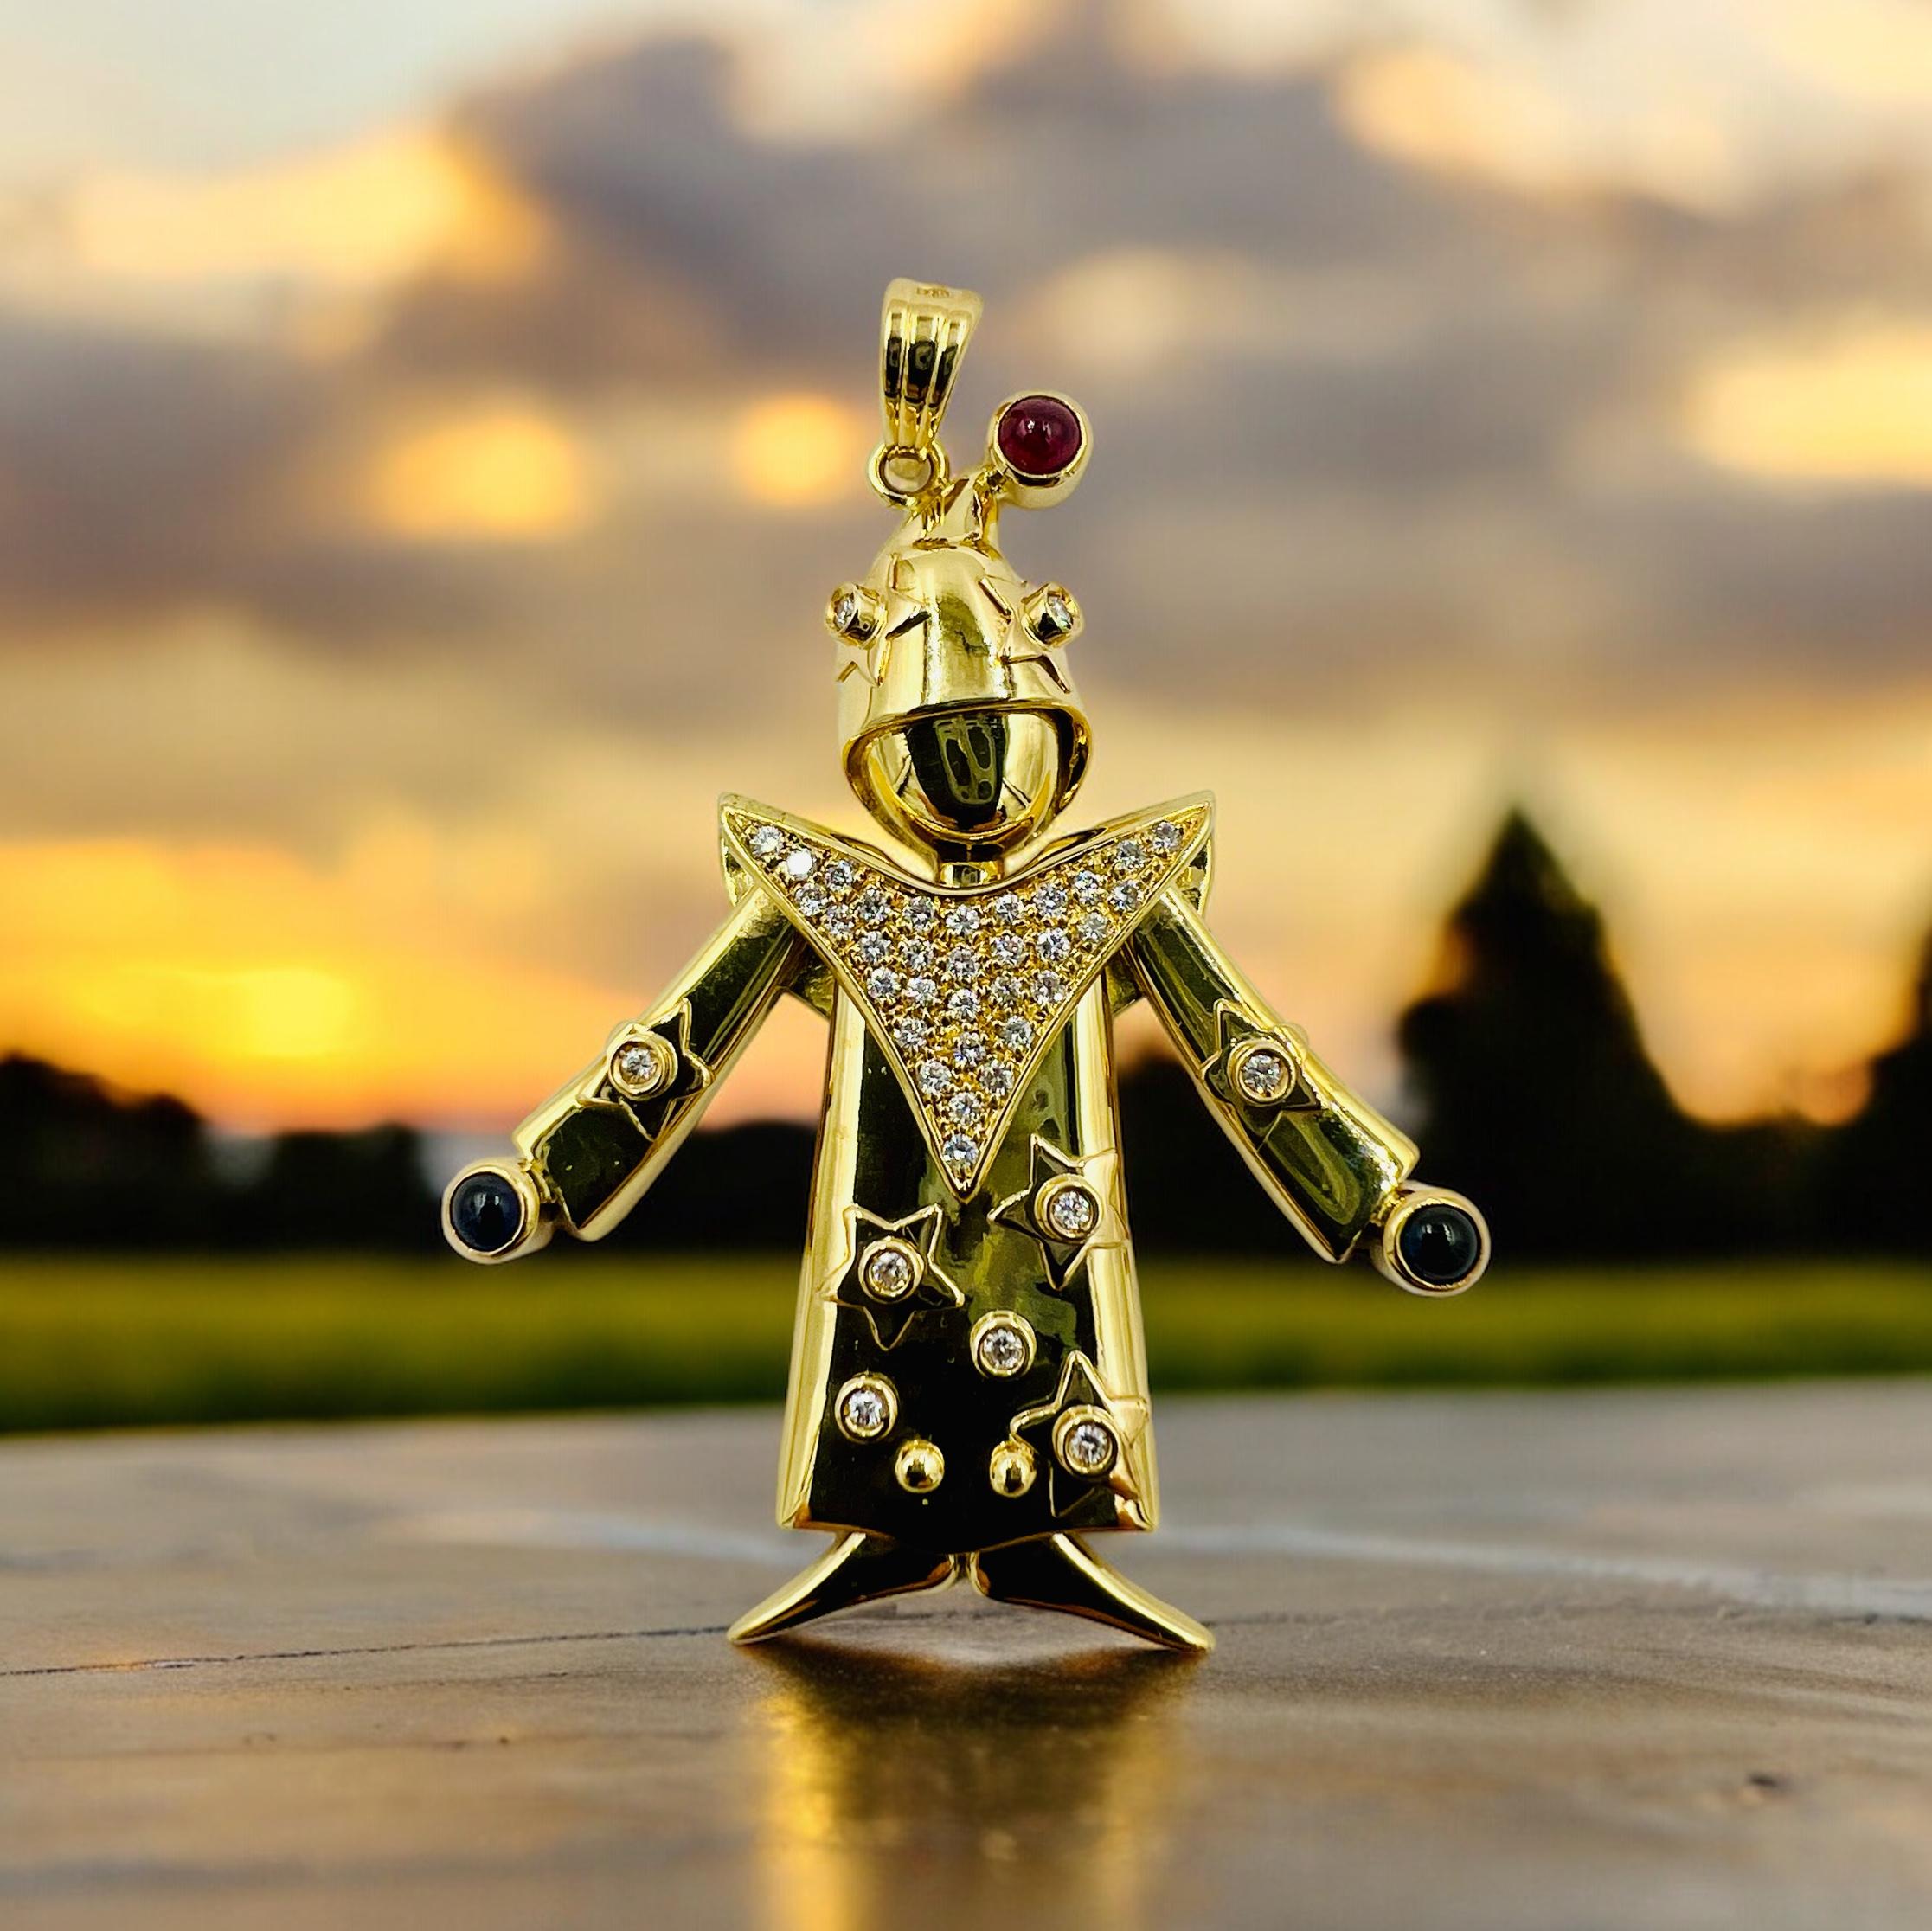 Articulated diamond ruby sapphire yellow gold clown pendant, circa 1990s.

This Articulated Diamond Ruby Sapphire Yellow Gold Clown Pendant is not just a piece of jewelry, it is a work of art that stands out from the crowd. Its intricate design